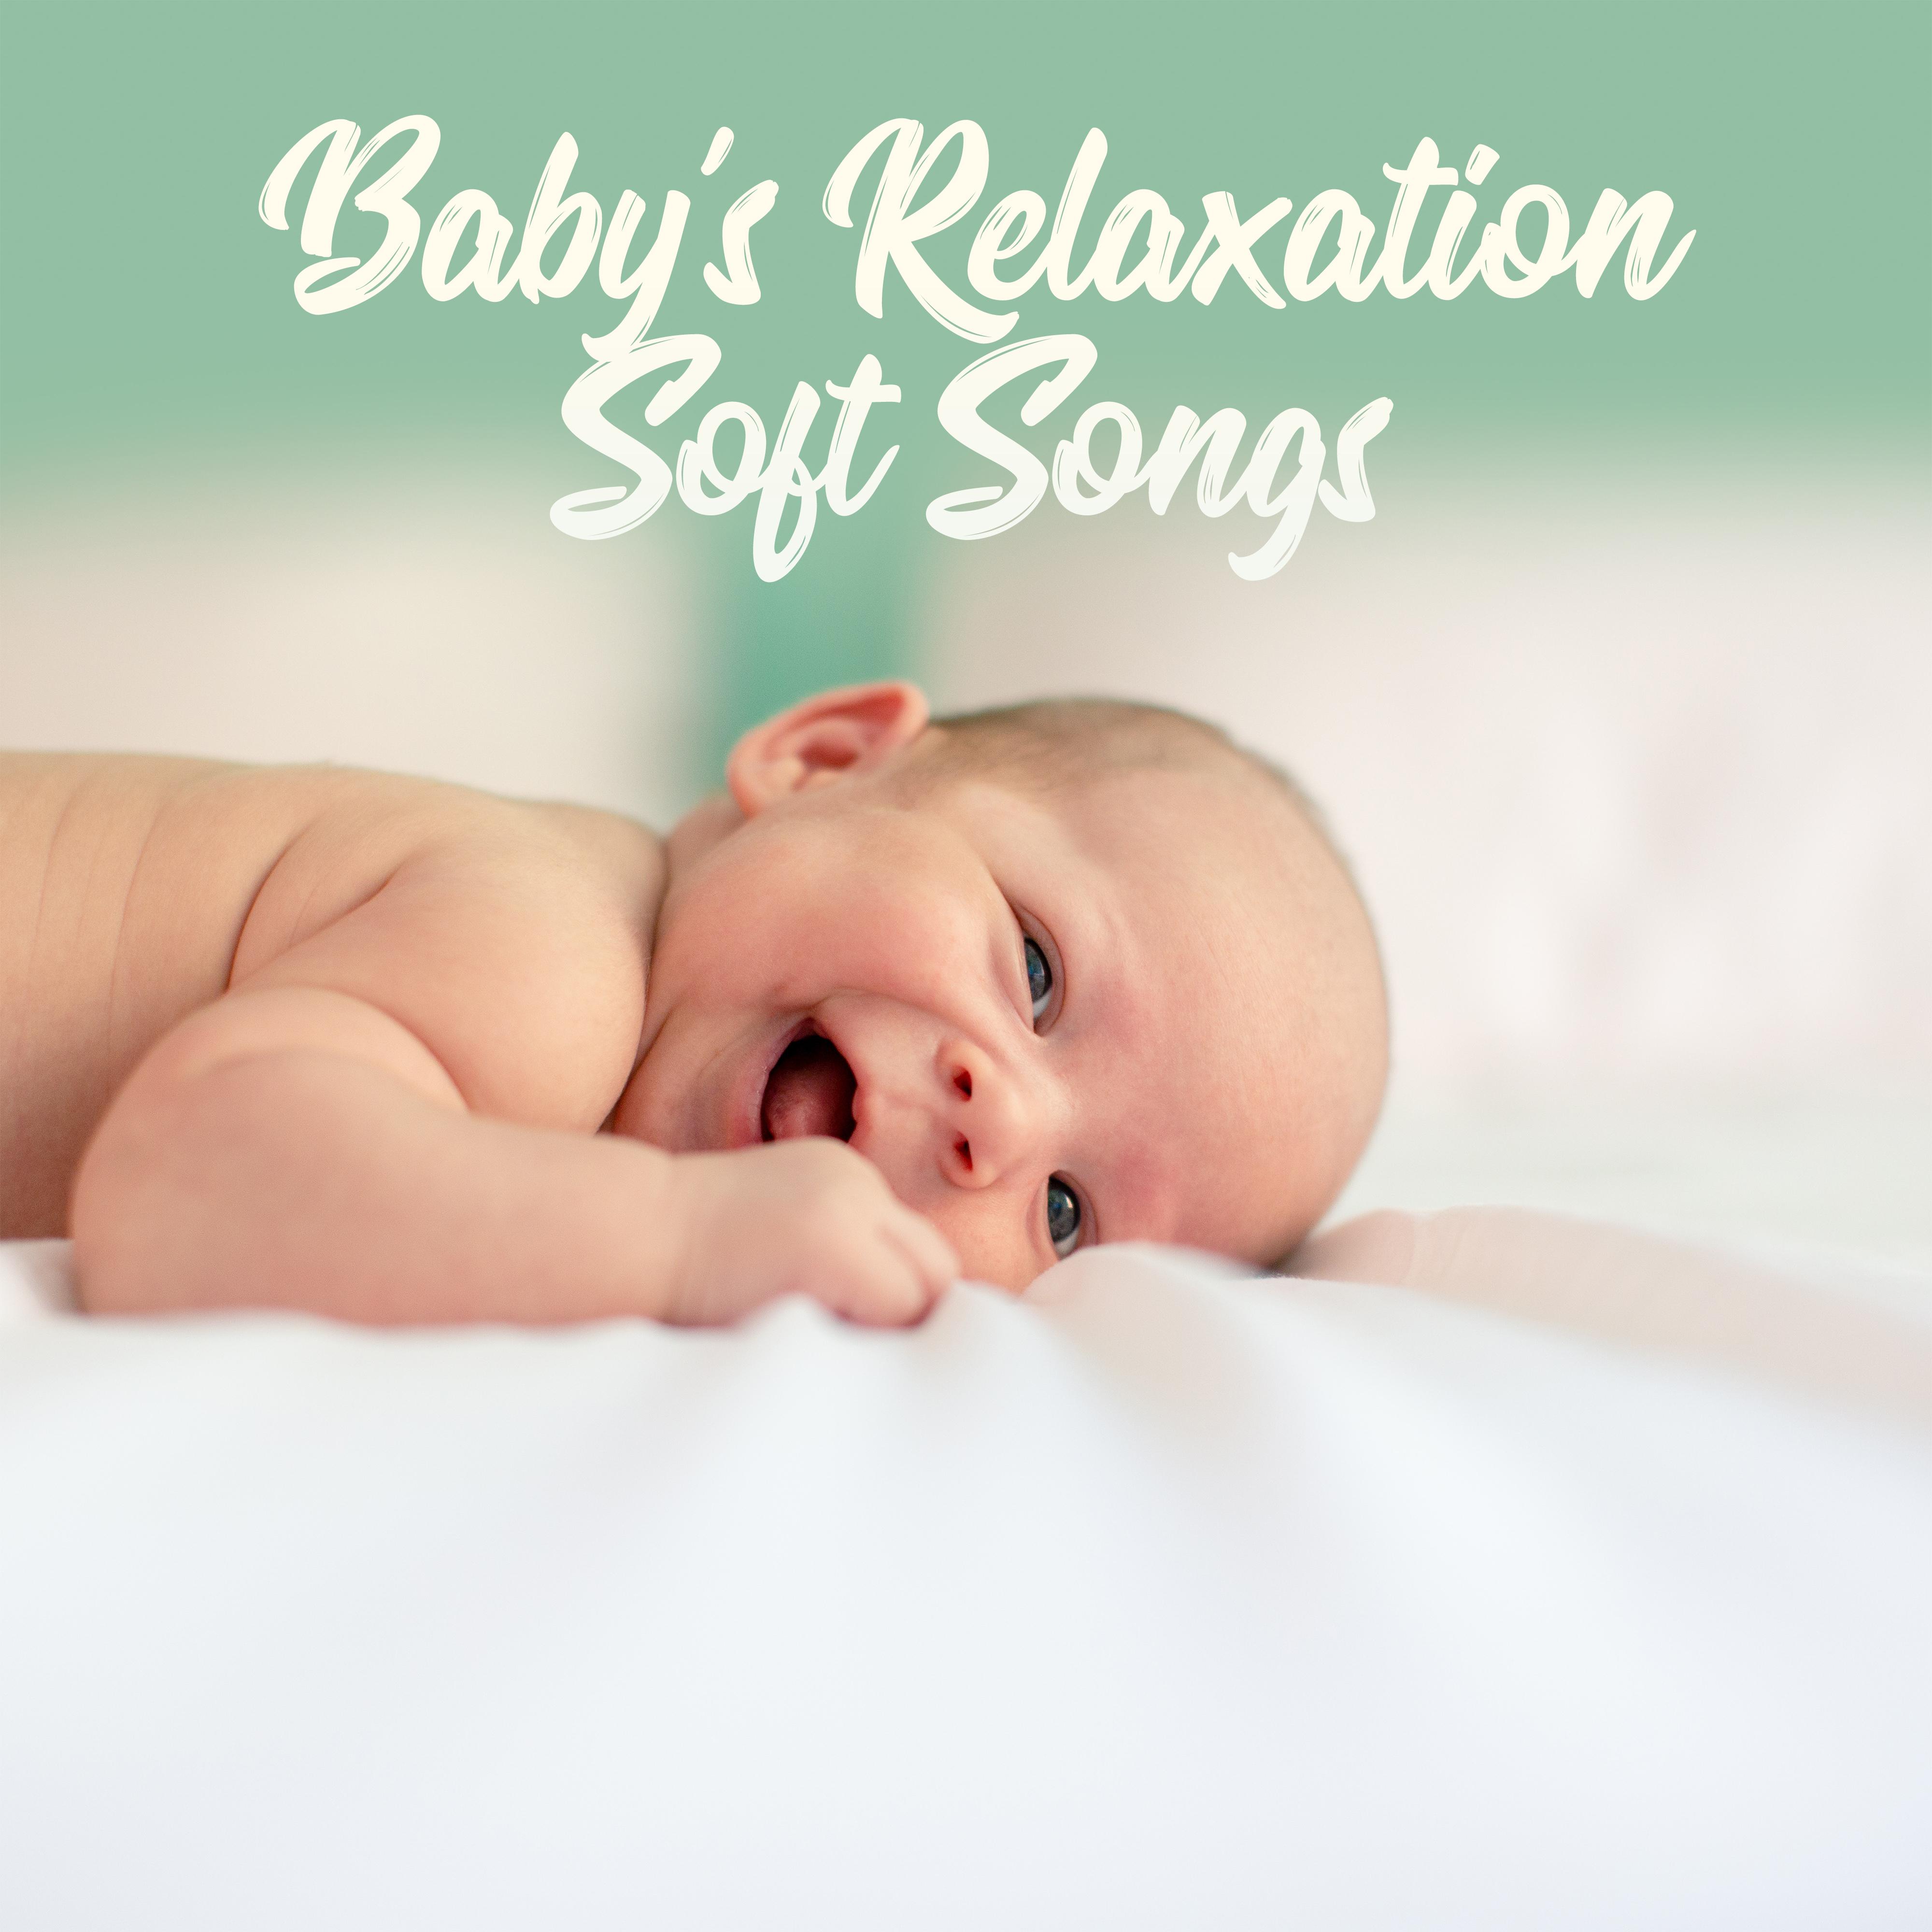 Baby's Relaxation Soft Songs: 15 New Age Soothing Songs for Baby's Calming Down & Sleep Well